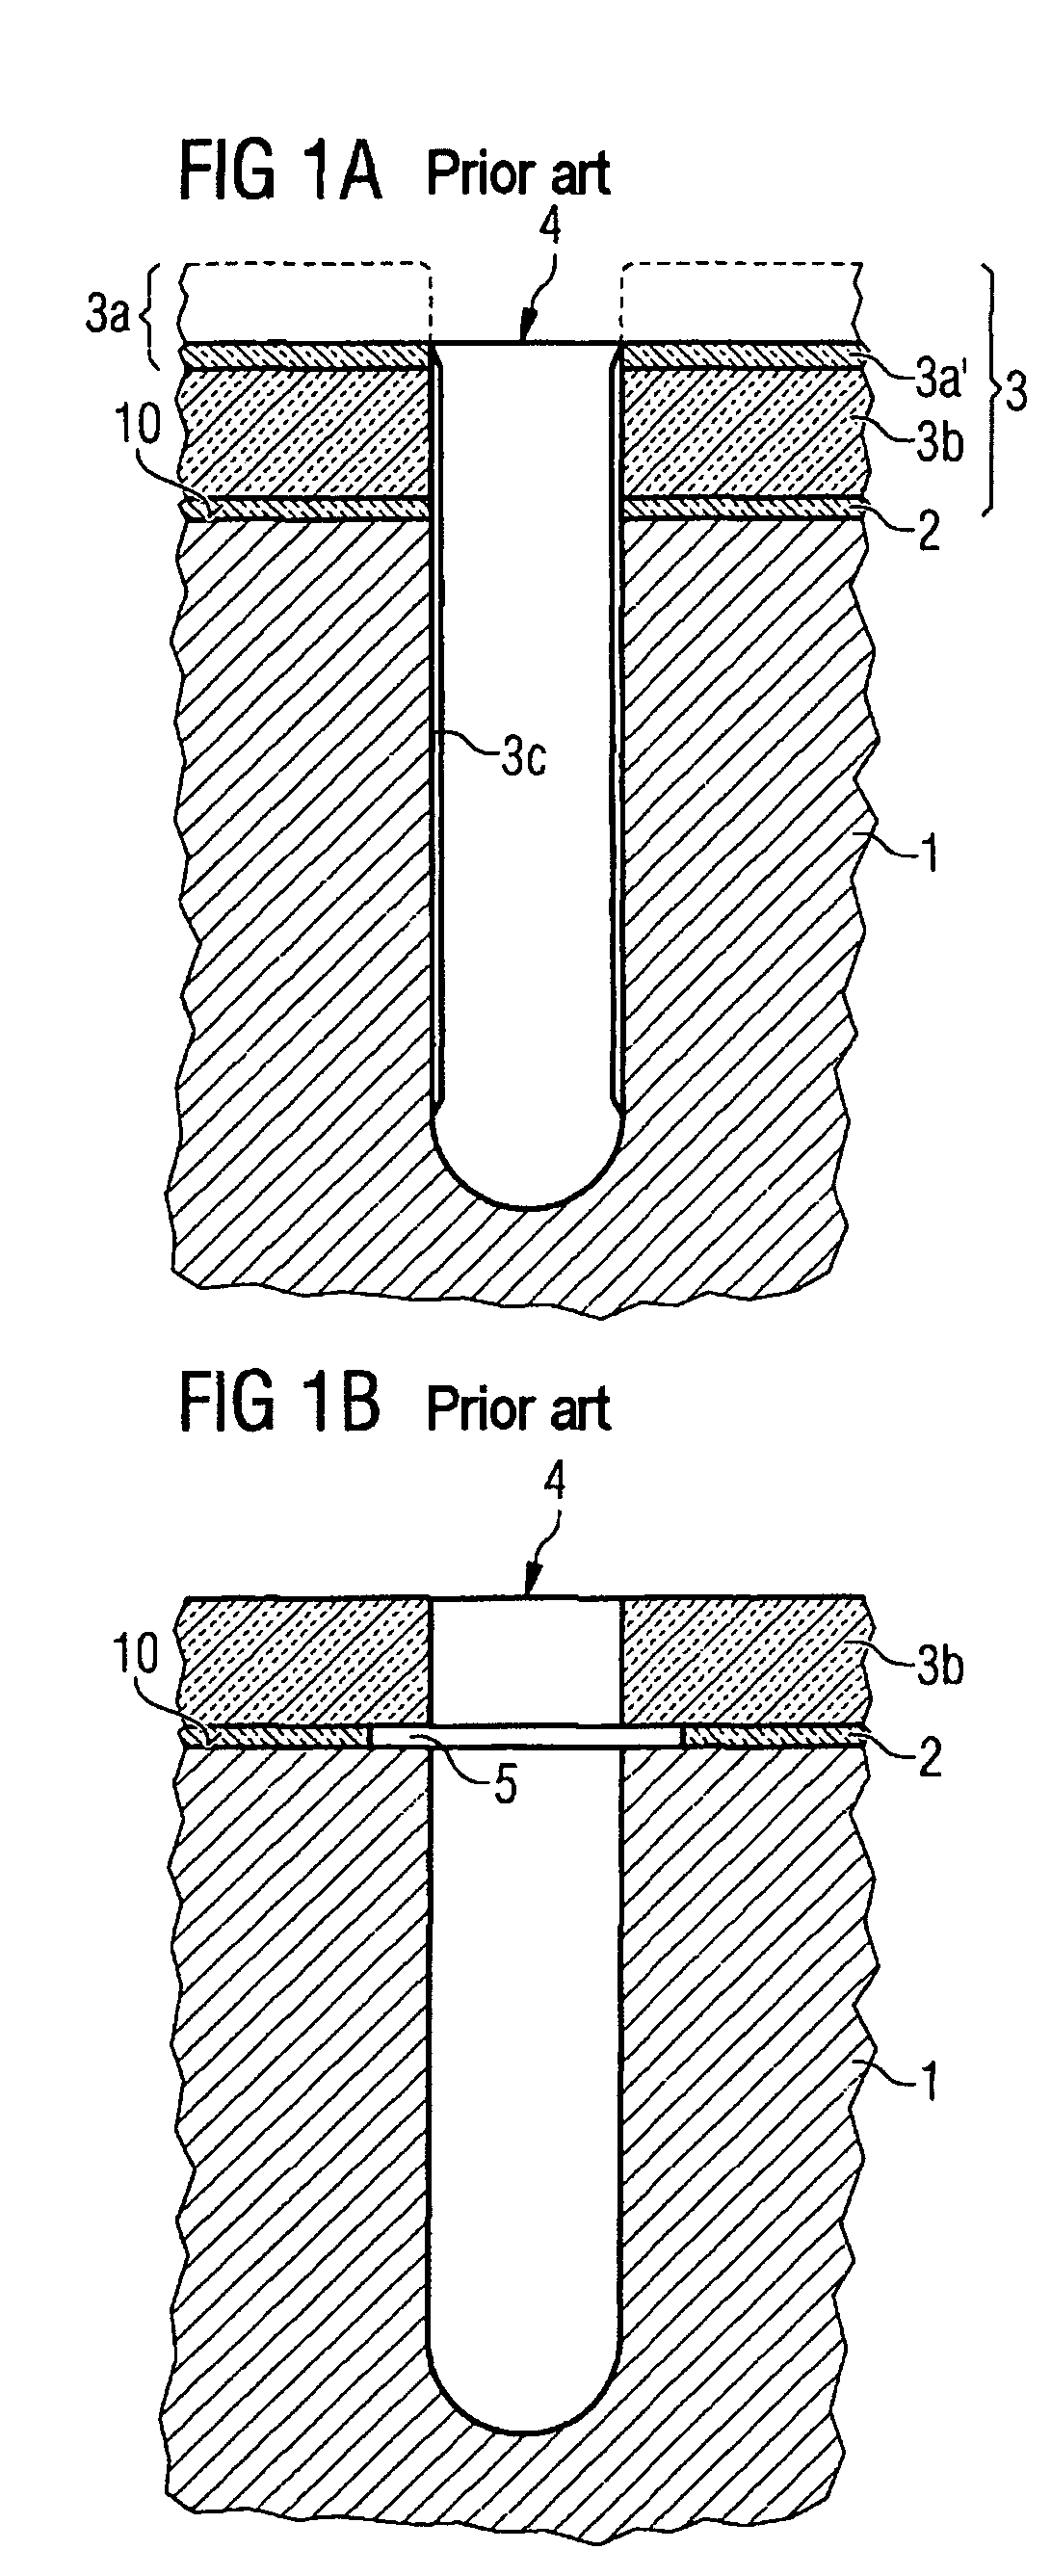 Trench capacitor structure and process for applying a covering layer and a mask for trench etching processes in semiconductor substrates